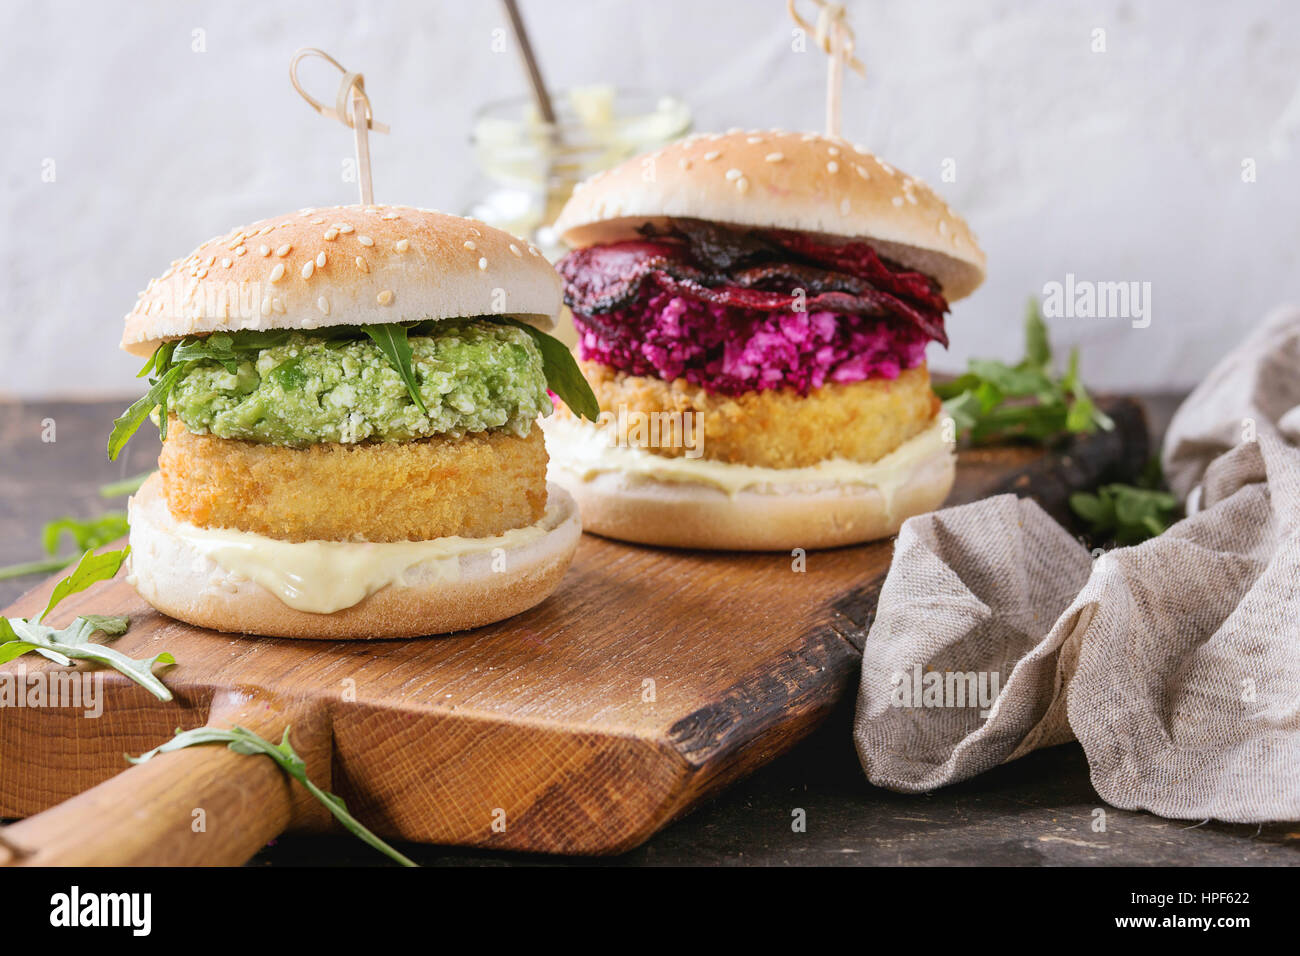 Two vegetarian hamburgers with onion and cheese cutlets, avocado salad, arugula, fried beetroot and yogurt sauce on wooden serving board over texture Stock Photo